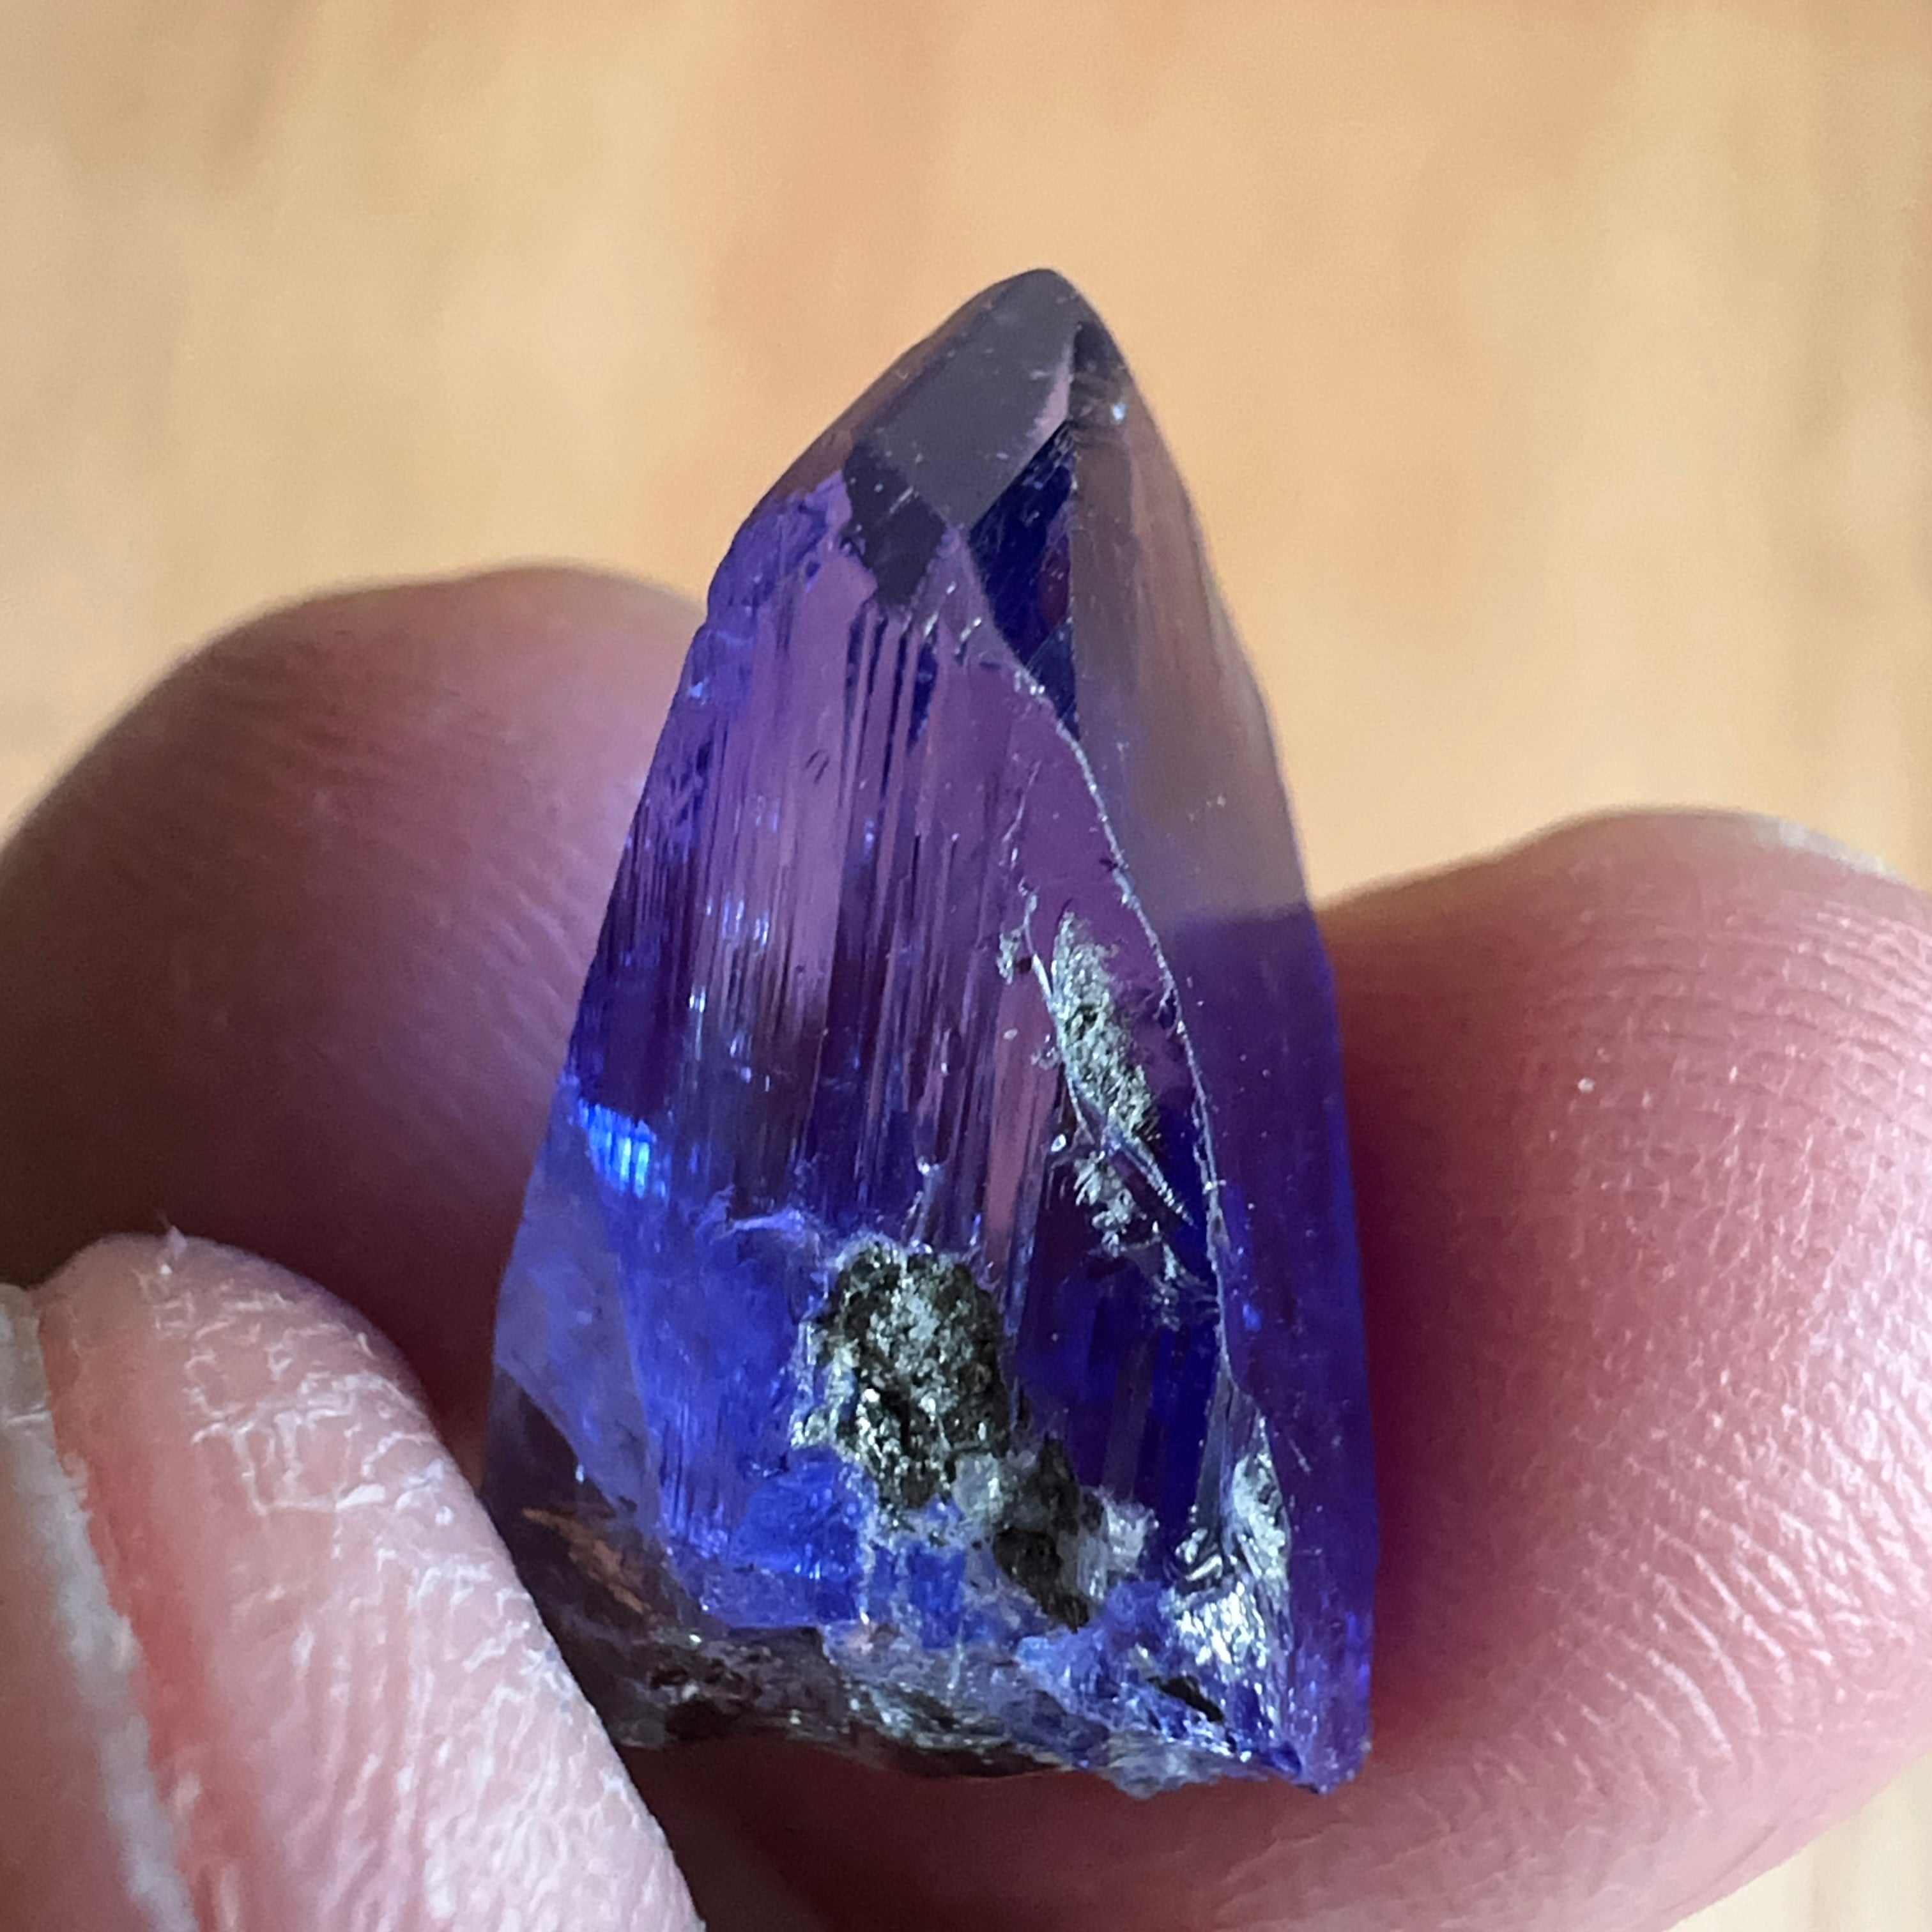 16.00ct Tanzanite Crystal, Merelani, Tanzania, Unheated Untreated, see the unheated brown at the bottom of the crystal